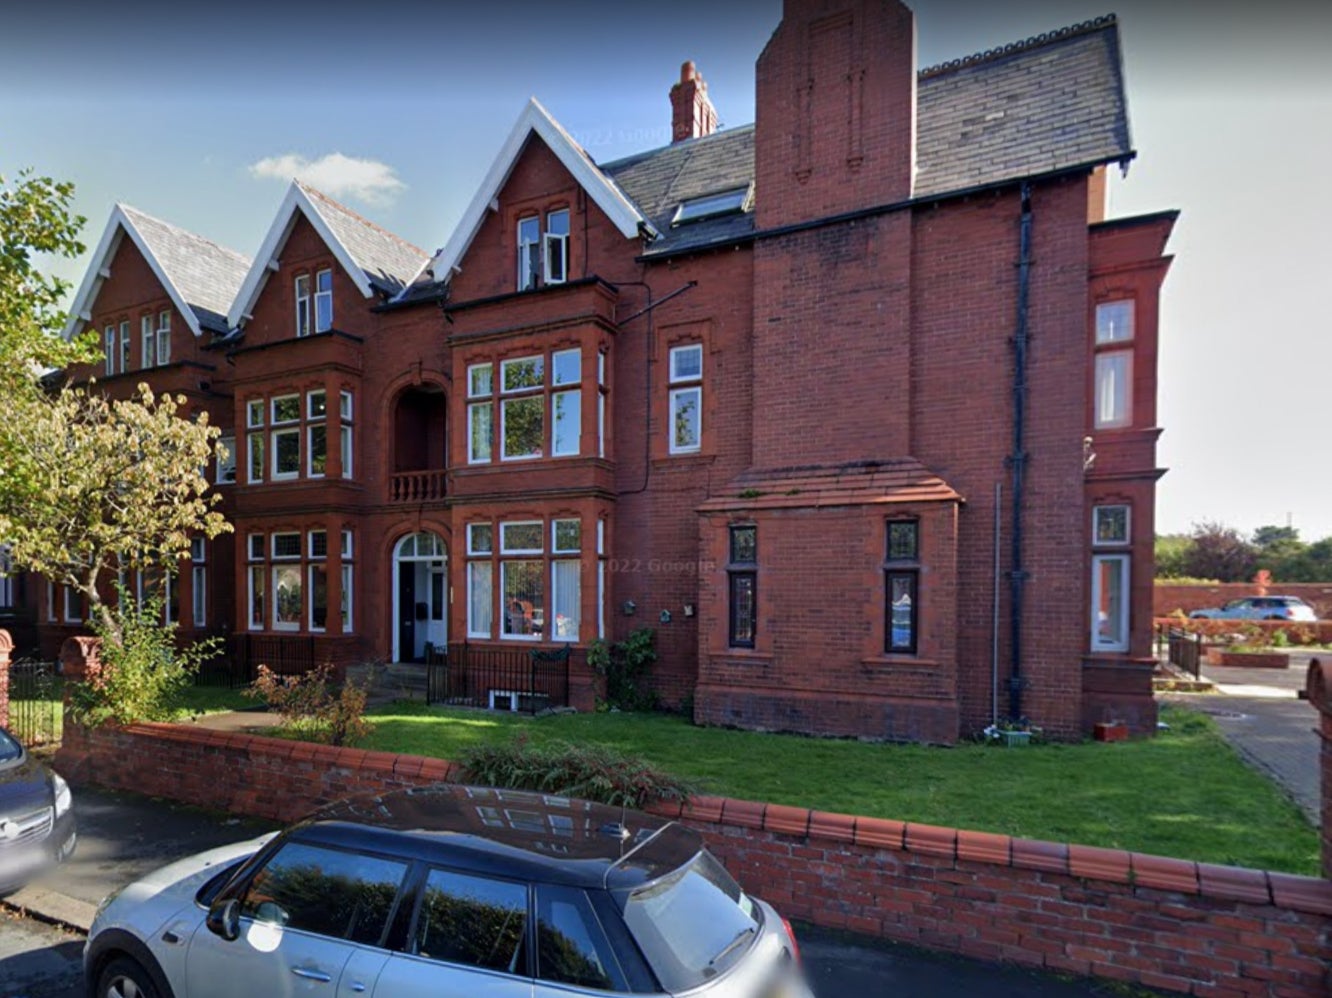 Police laid siege to Belmar Nursing Home (pictured) in Lytham St Annes, Lancashire, on October 2